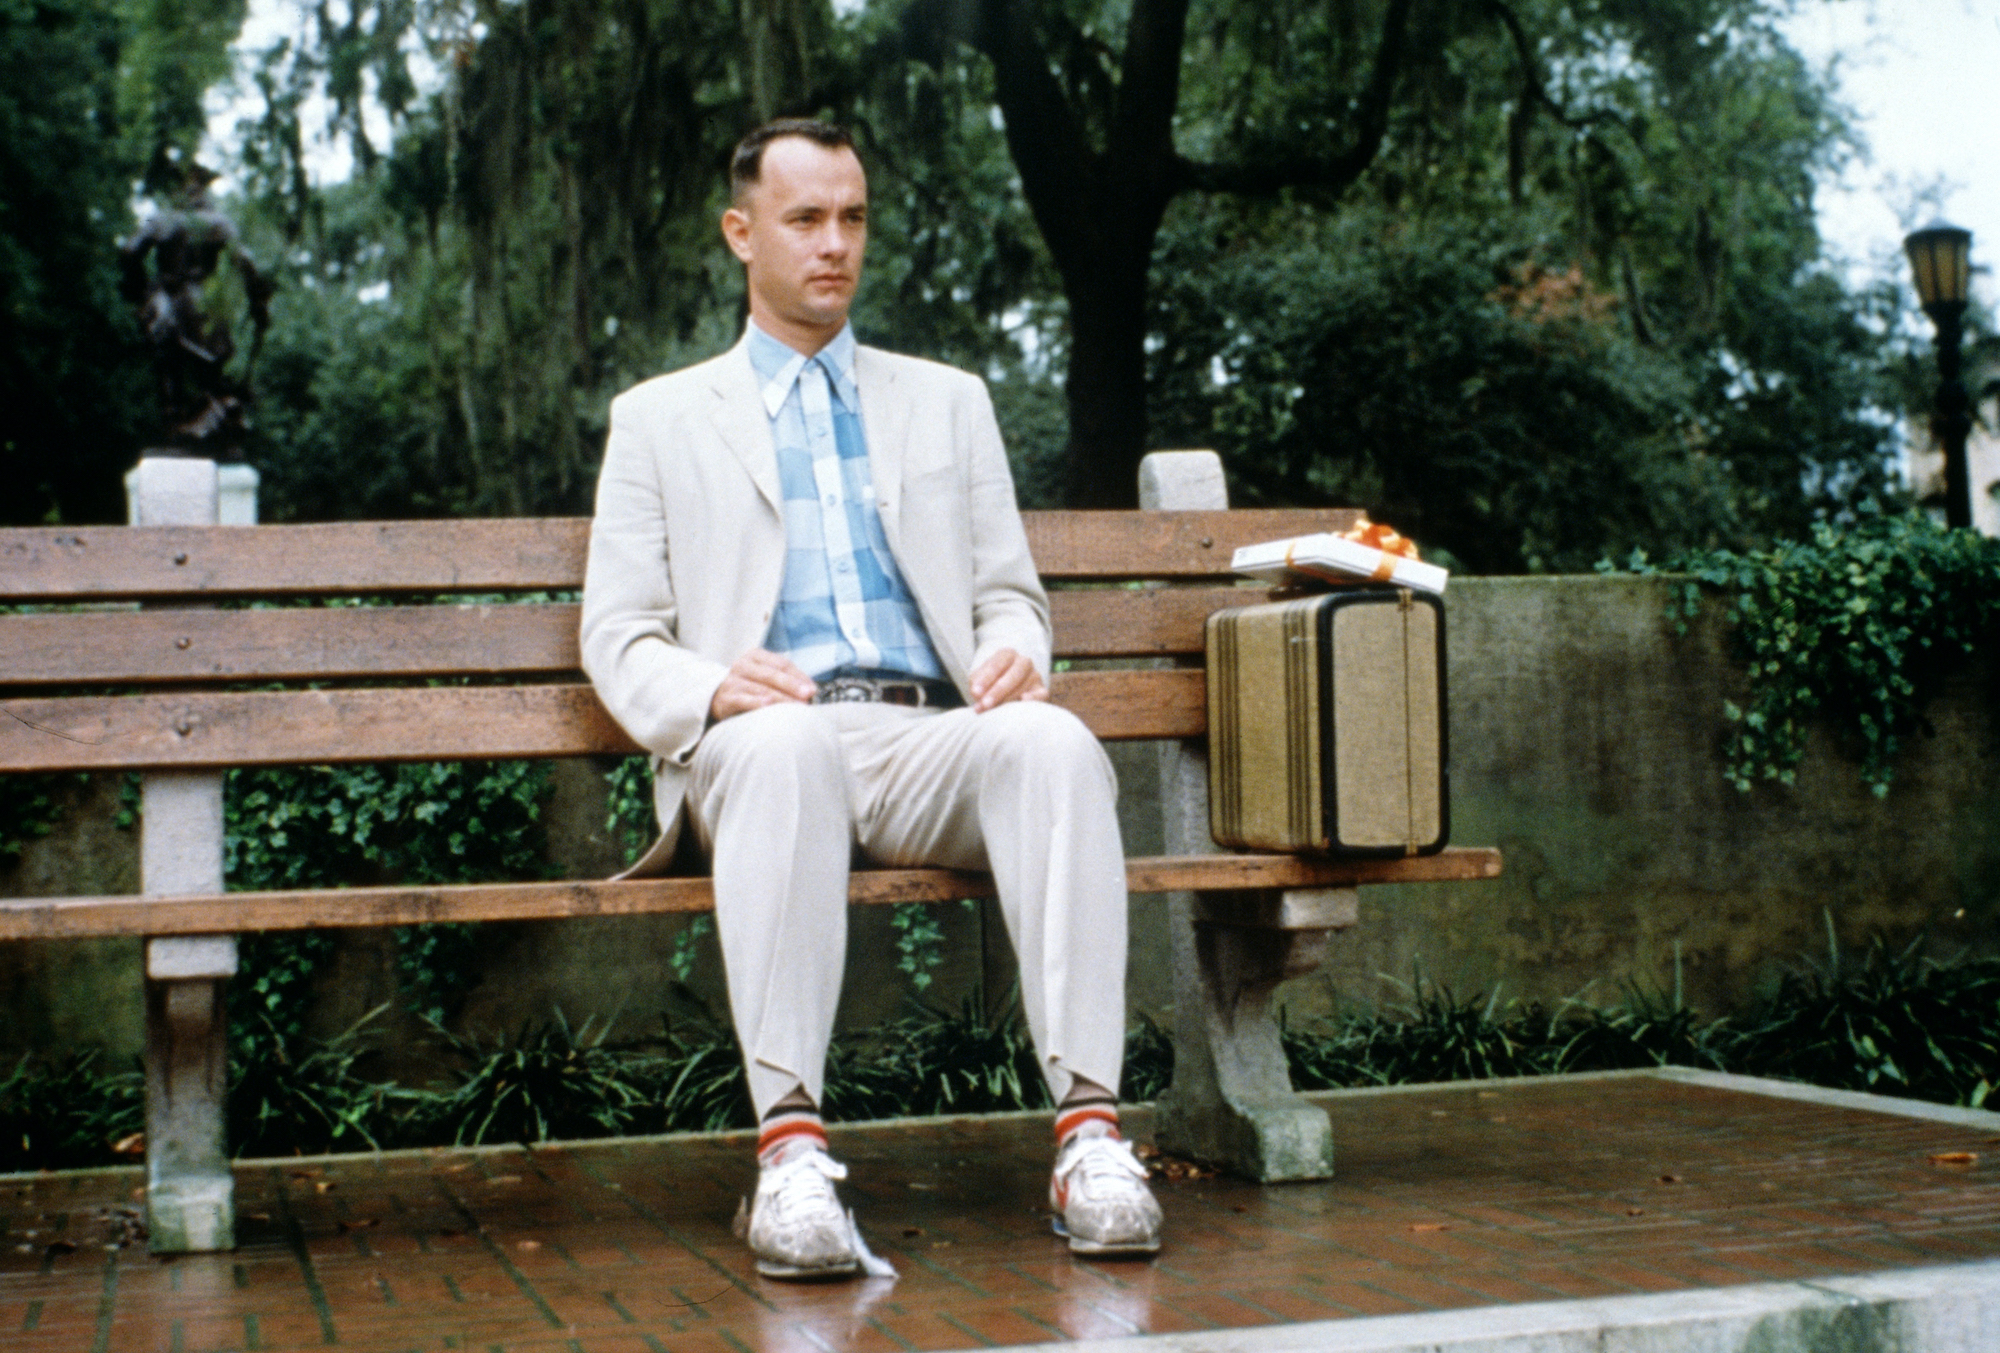 Tom Hanks sitting on a bench in a scene from 'Forrest Gump'